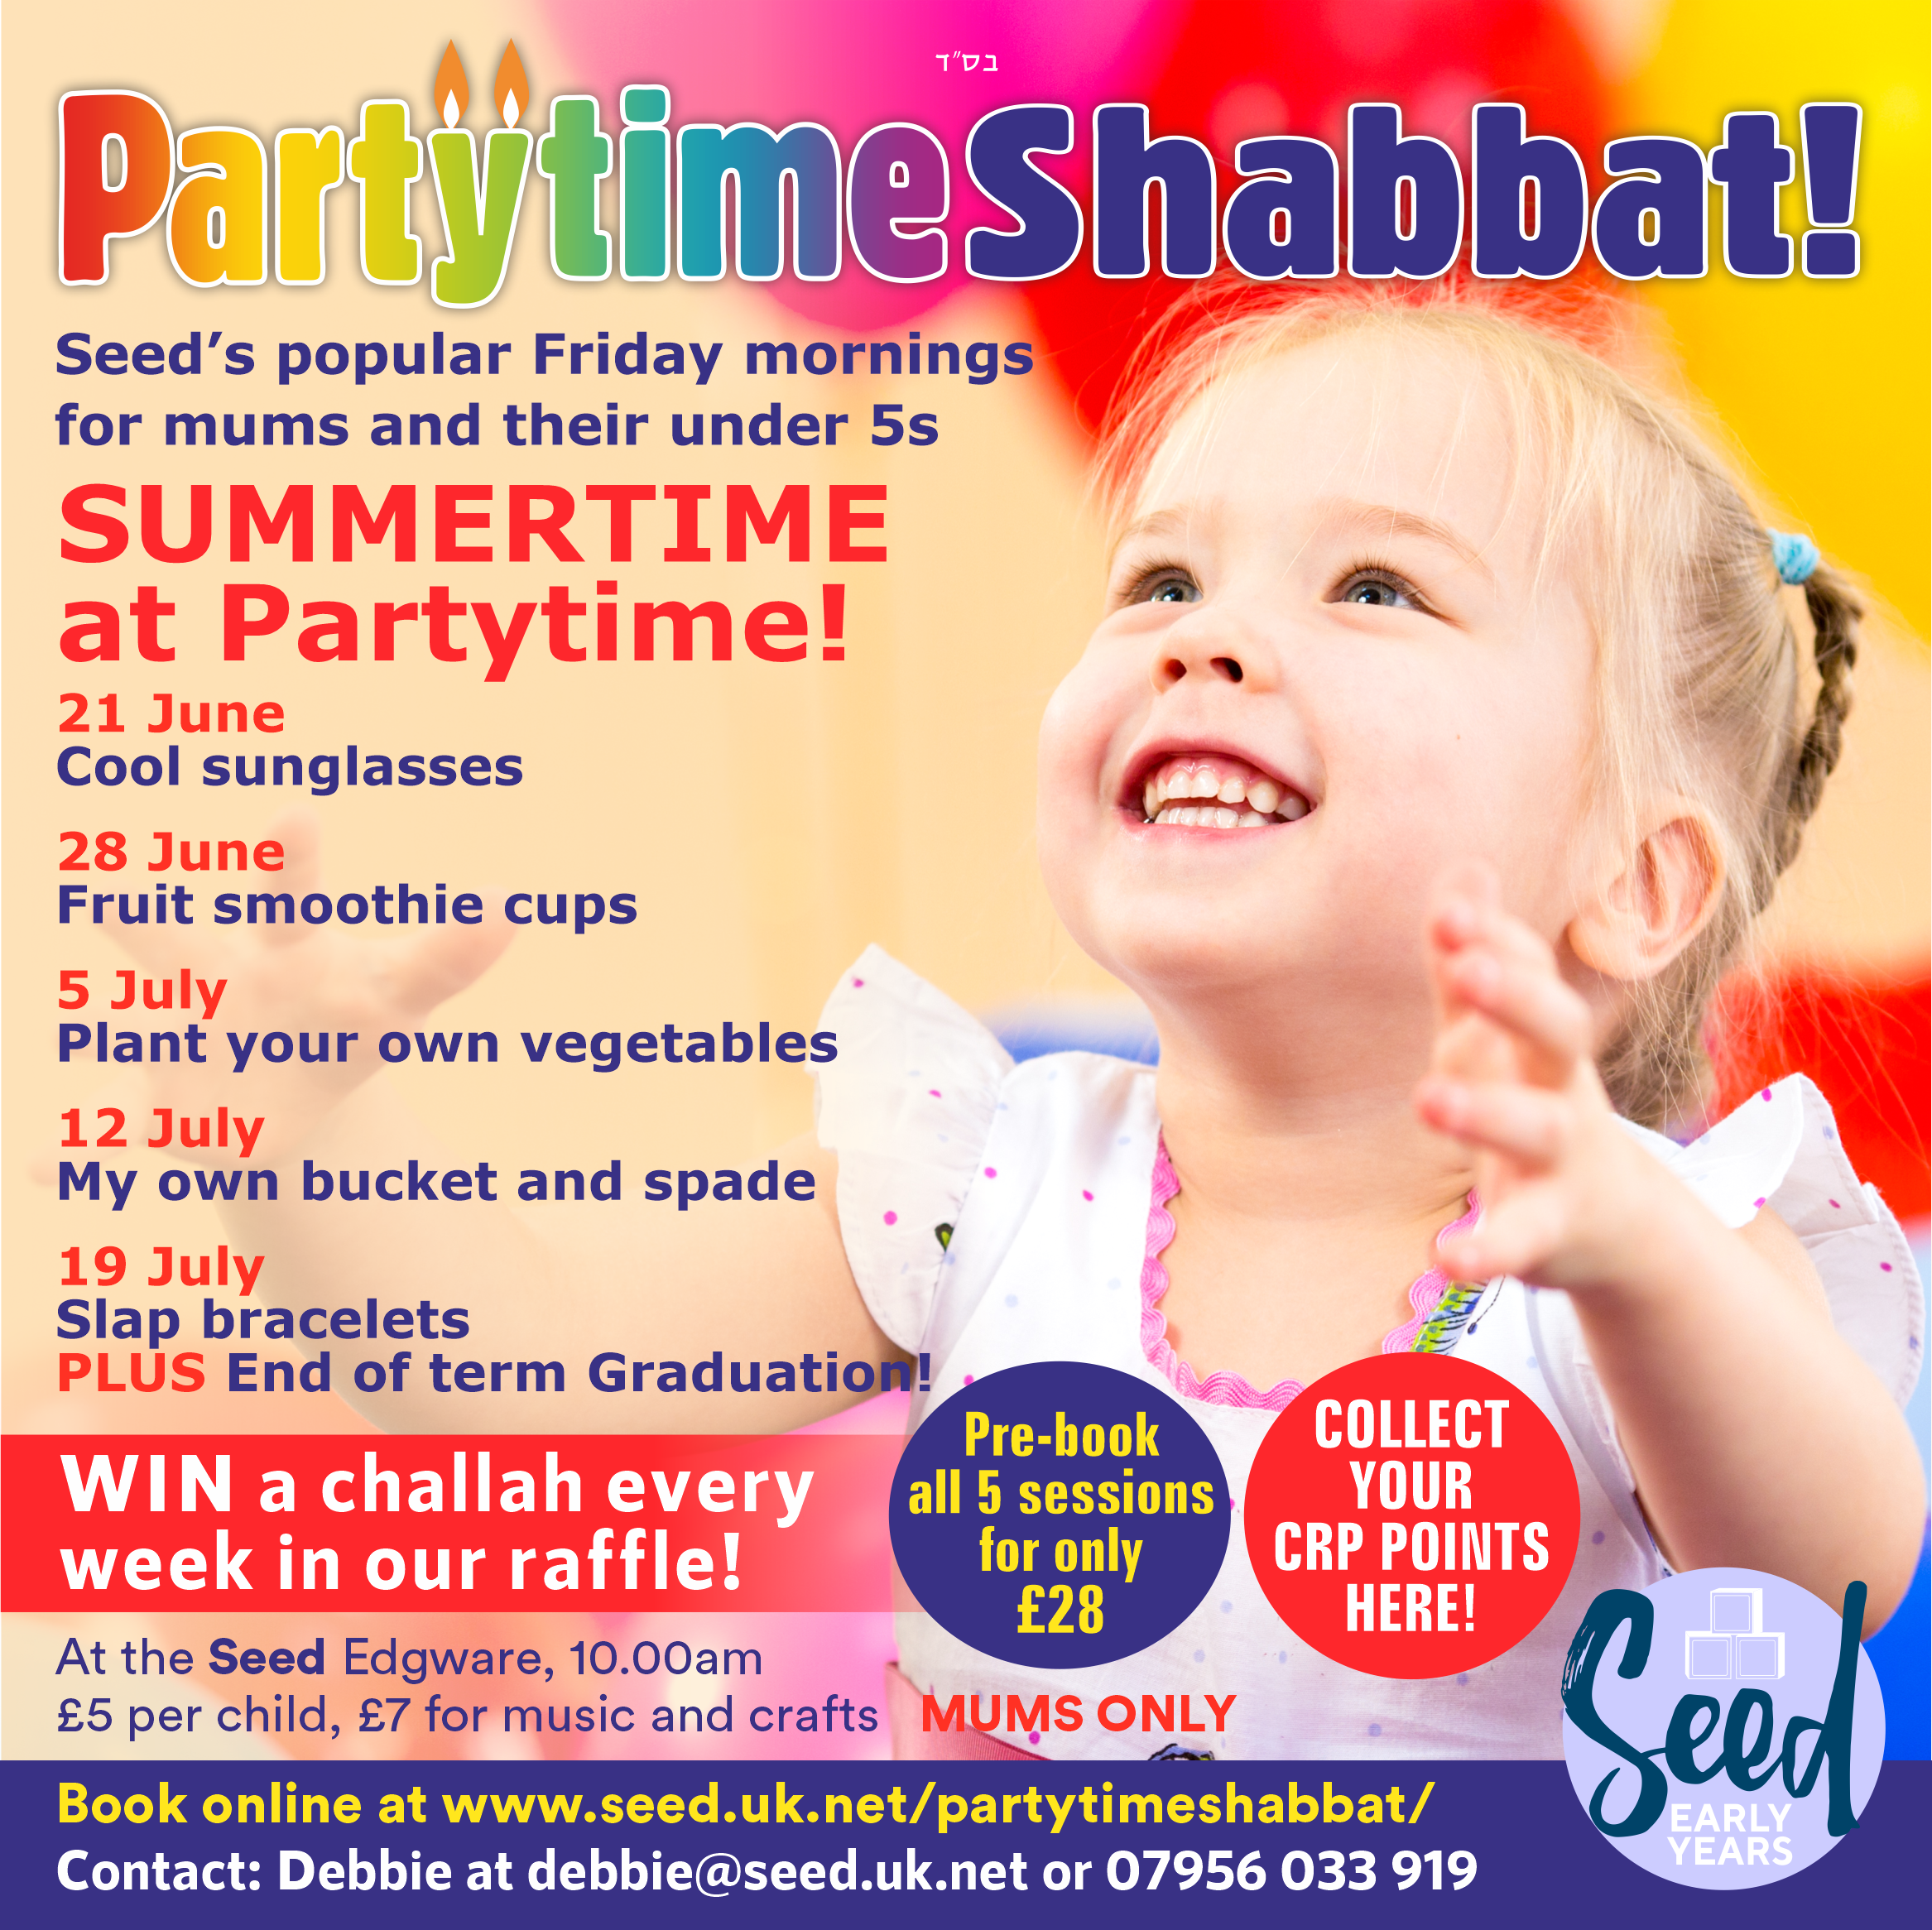 You are currently viewing Partytime Shabbat – Summertime at Partytime!